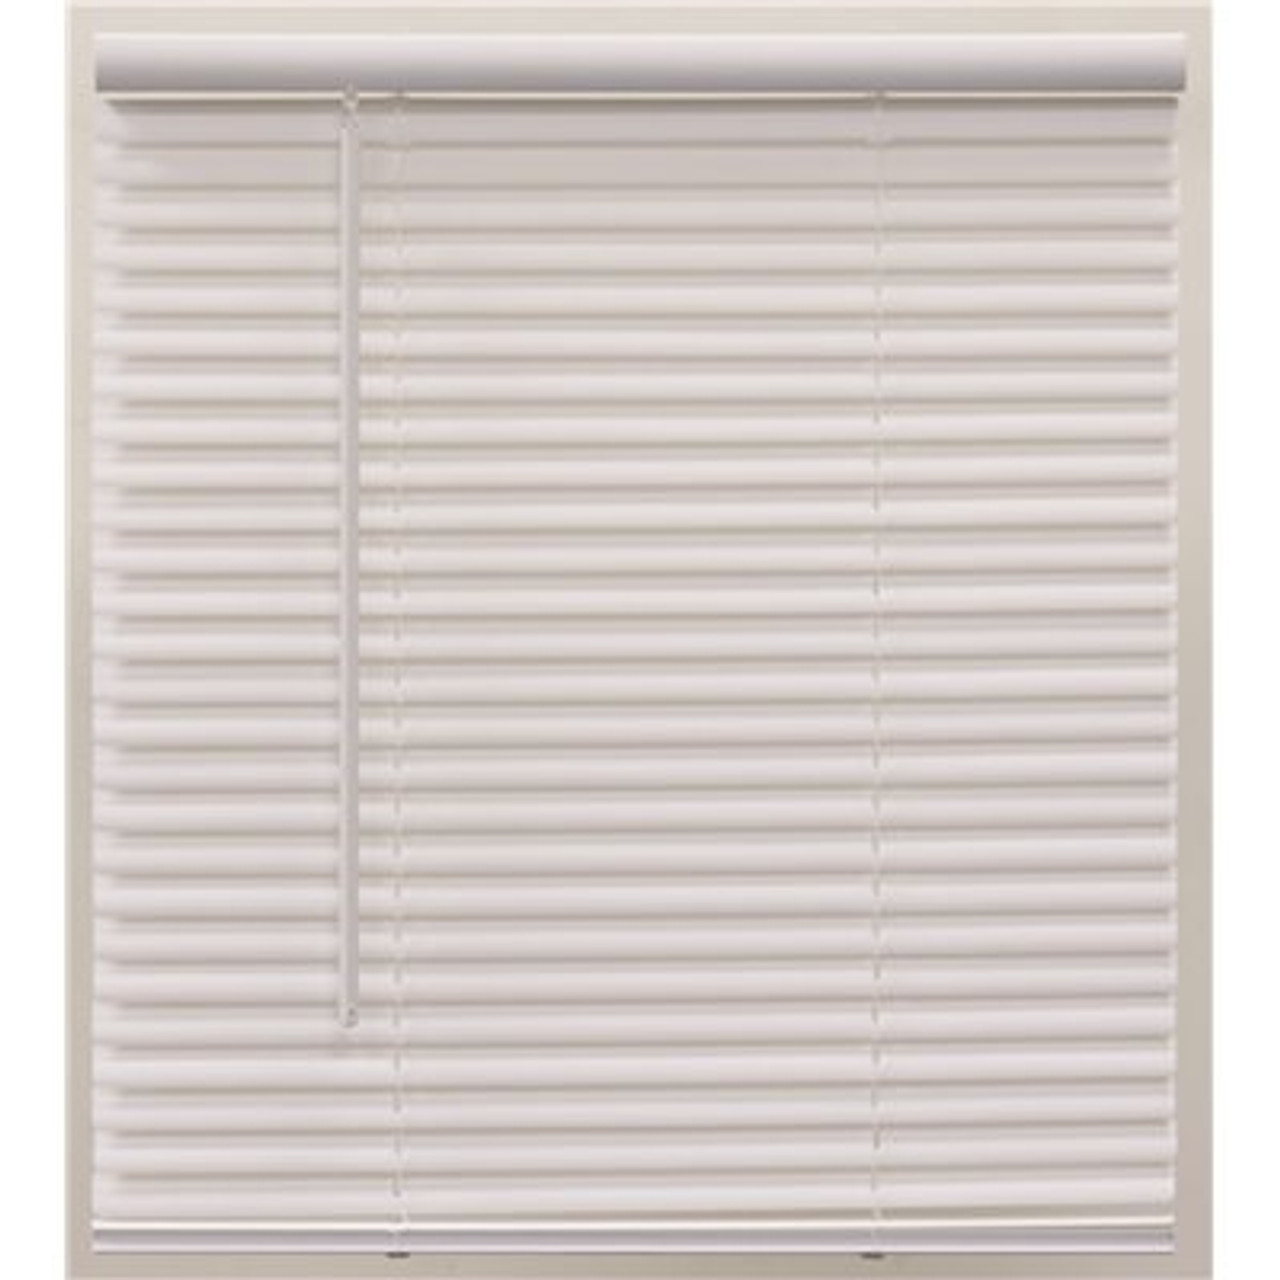 Champion Pre-Cut 44 in. W x 64 in. L White Cordless Light Filtering Vinyl Mini Blind with 1 in. Slats